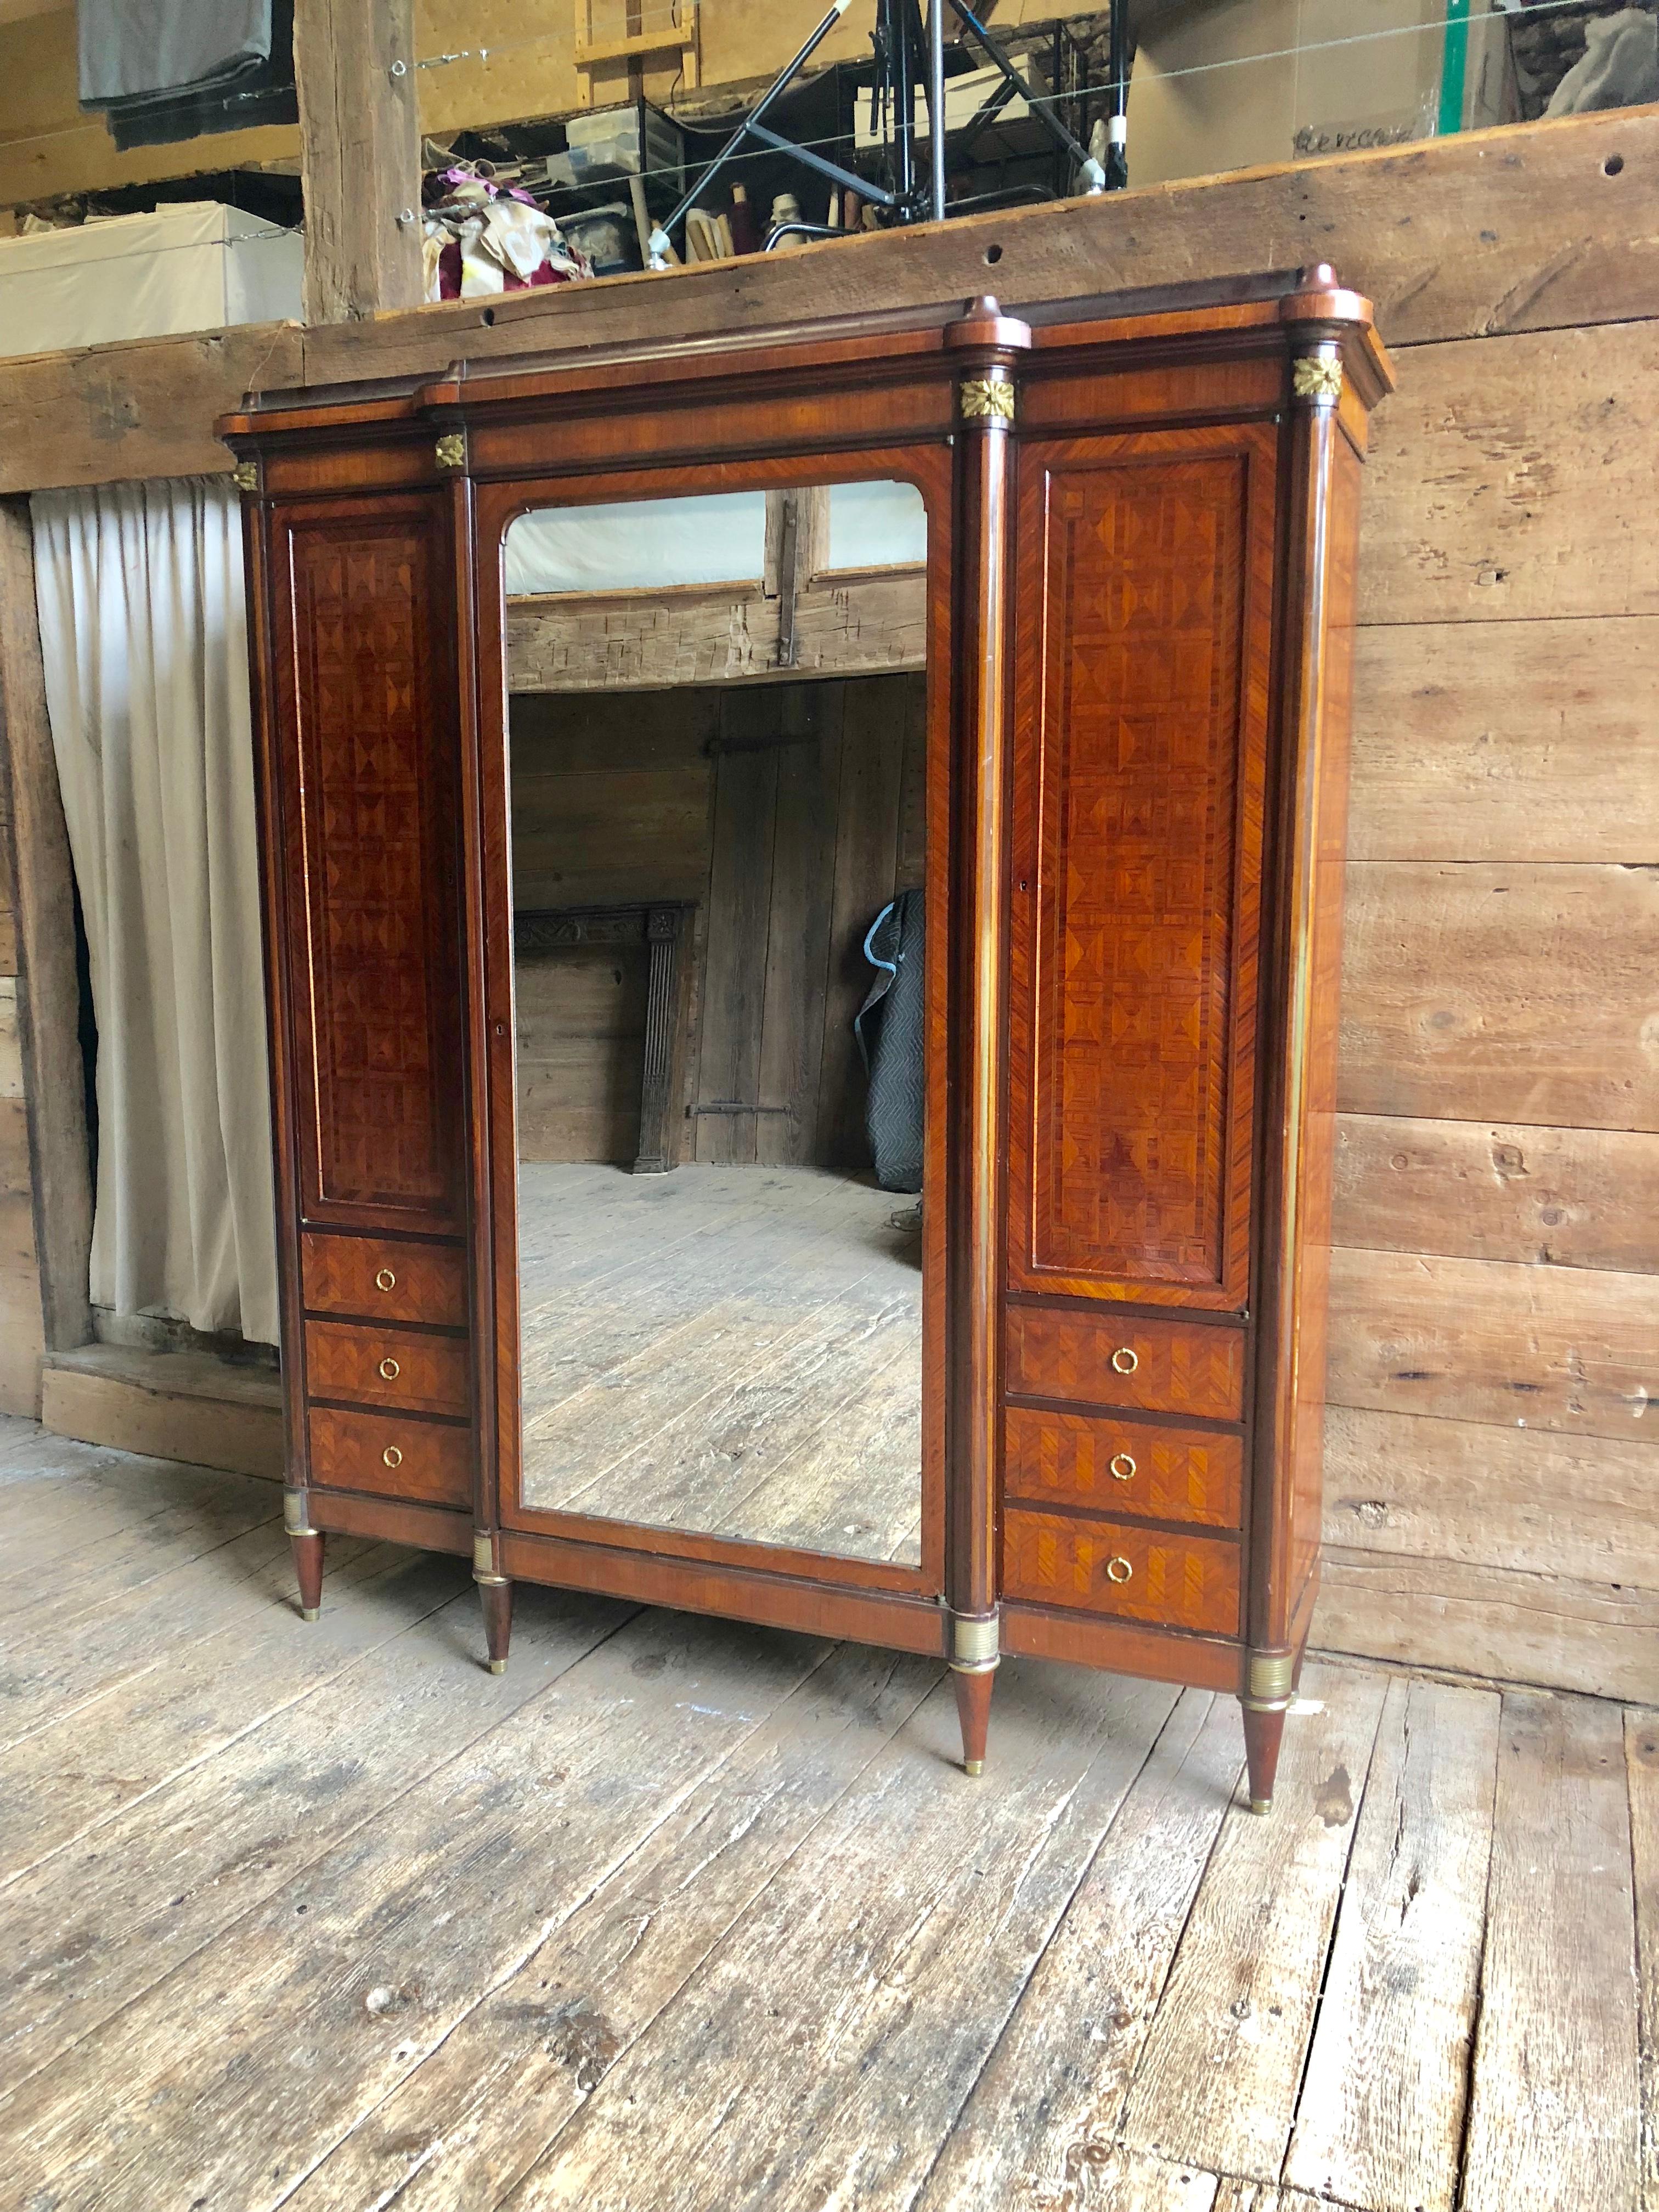 A French Belle Epoche period armoire in the Louis XVI style with marquetry inlay, gilt bronze mounts and a mirrored door. The interior side cabinets and central cabinet each have 4 adjustable shelves. The piece disassembles easily for moving and